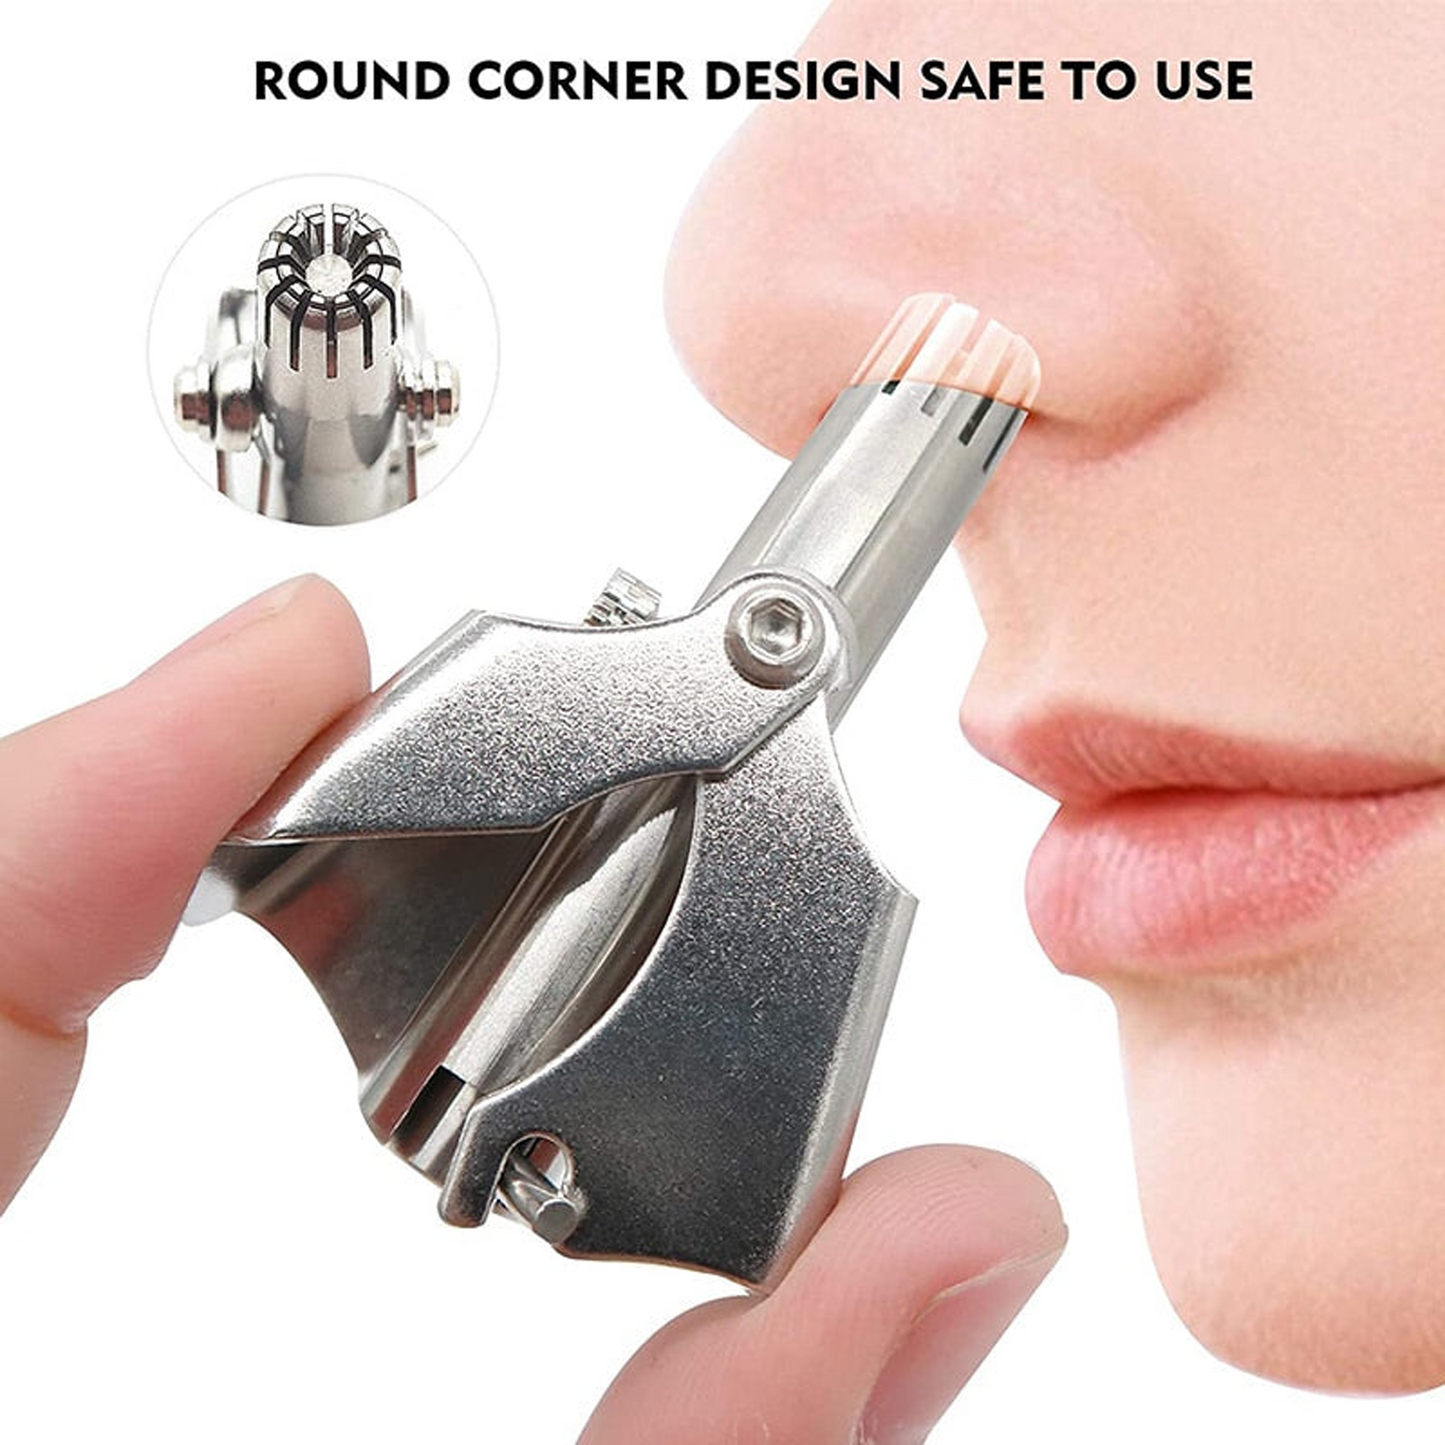 Nose Hair Trimmer Tool